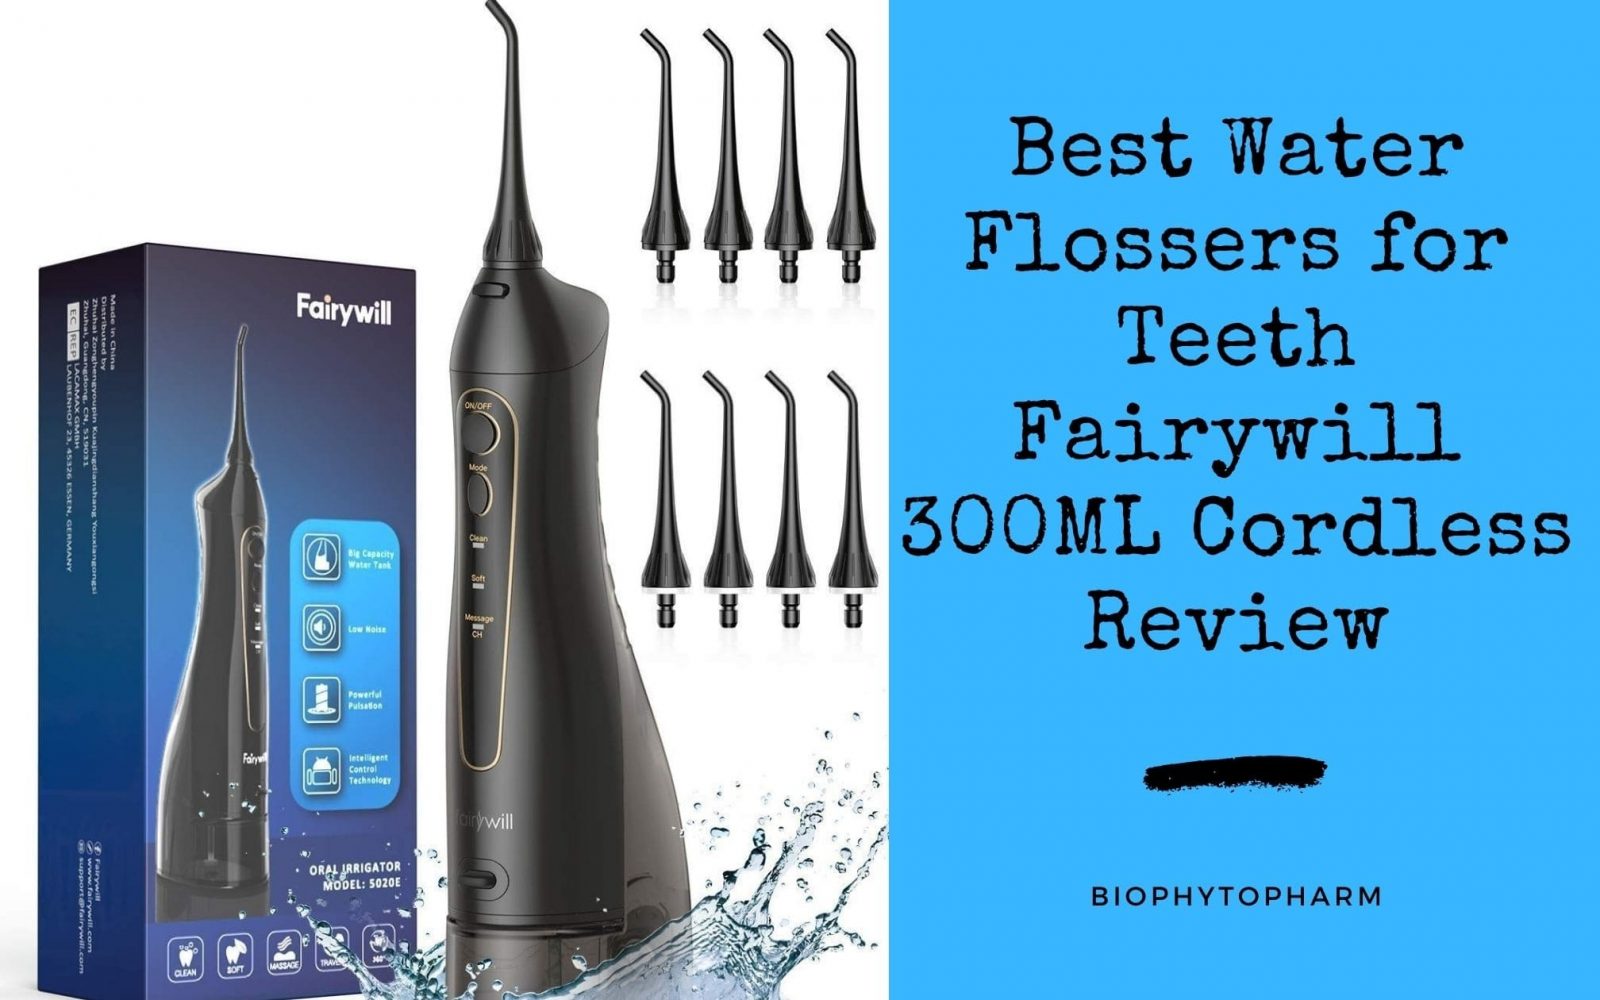 Best Water Flossers for Teeth Fairywill 300ML Cordless Review